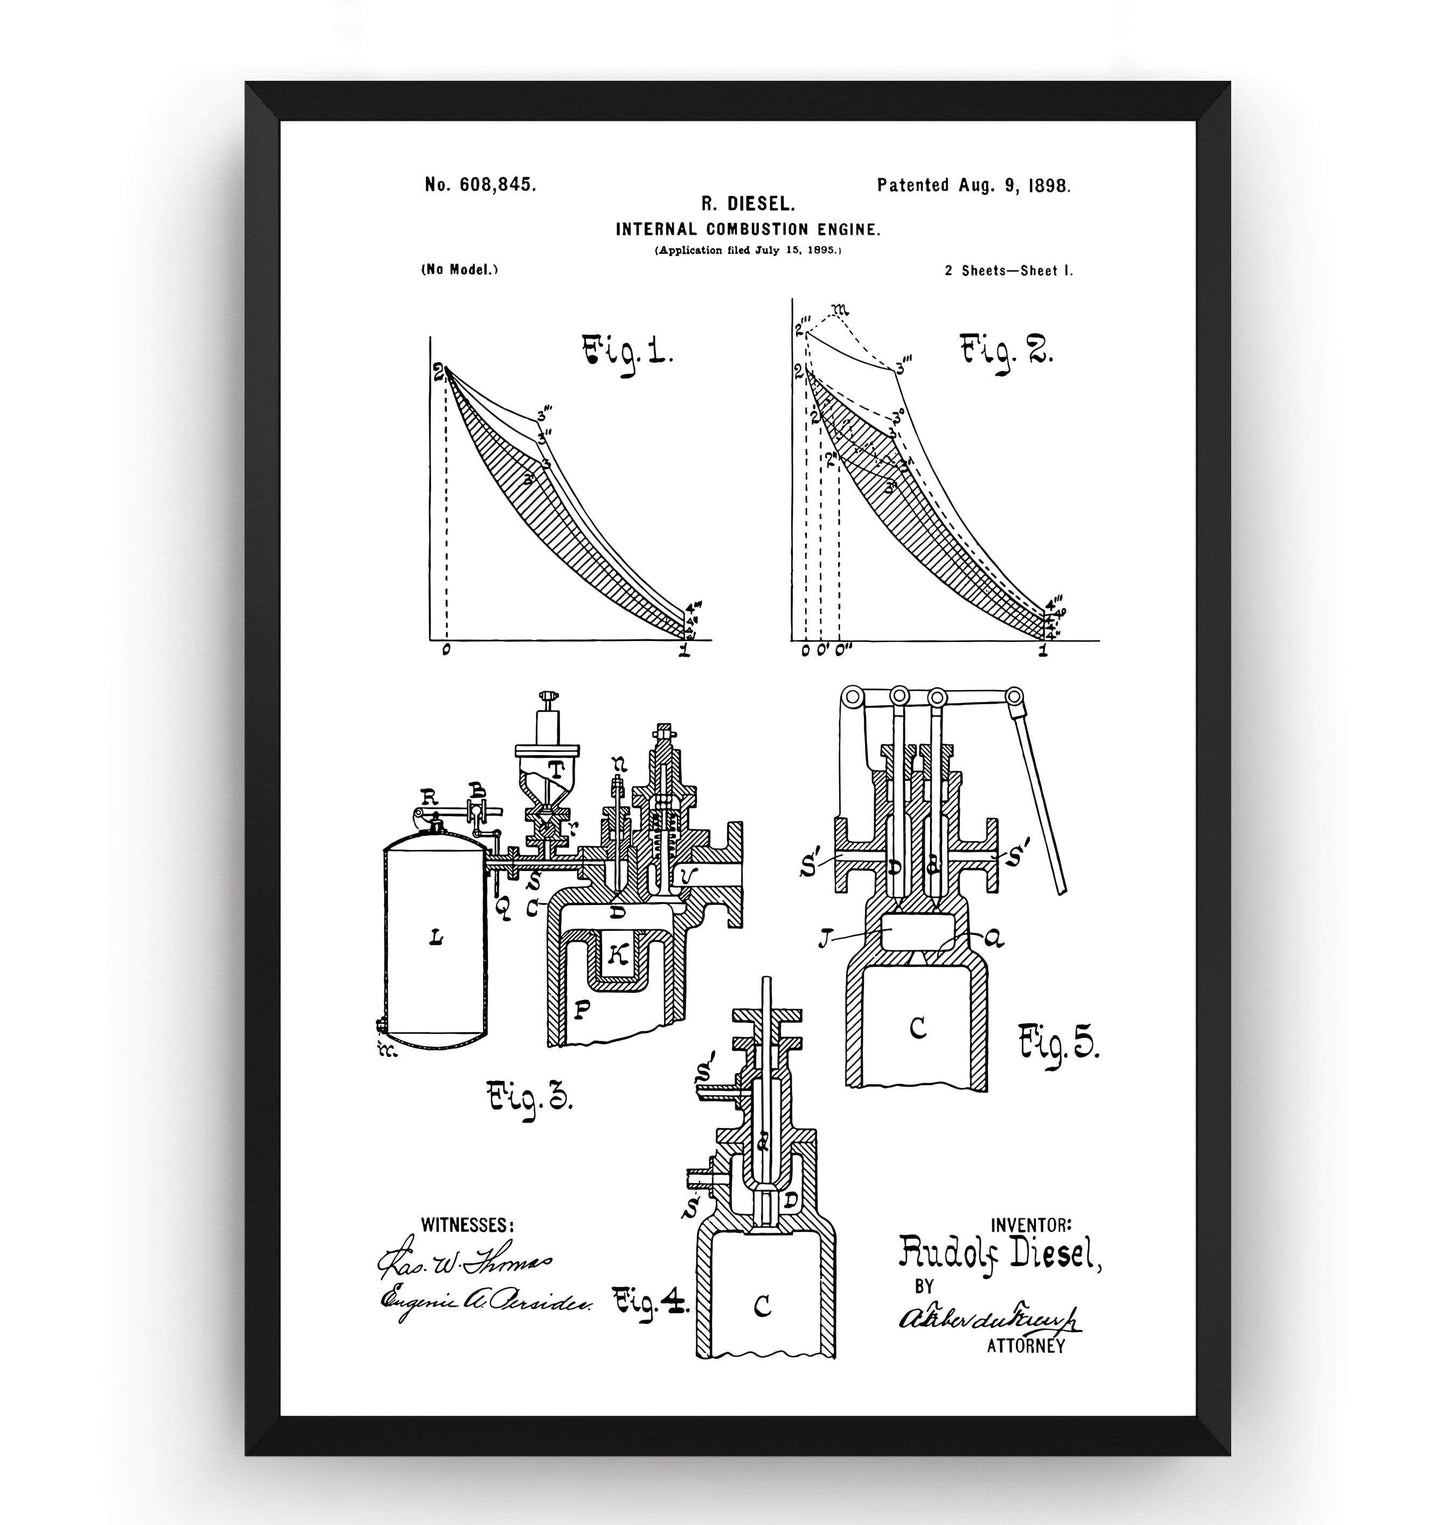 Diesel Combustion Engine Page 1 Patent Print - Magic Posters